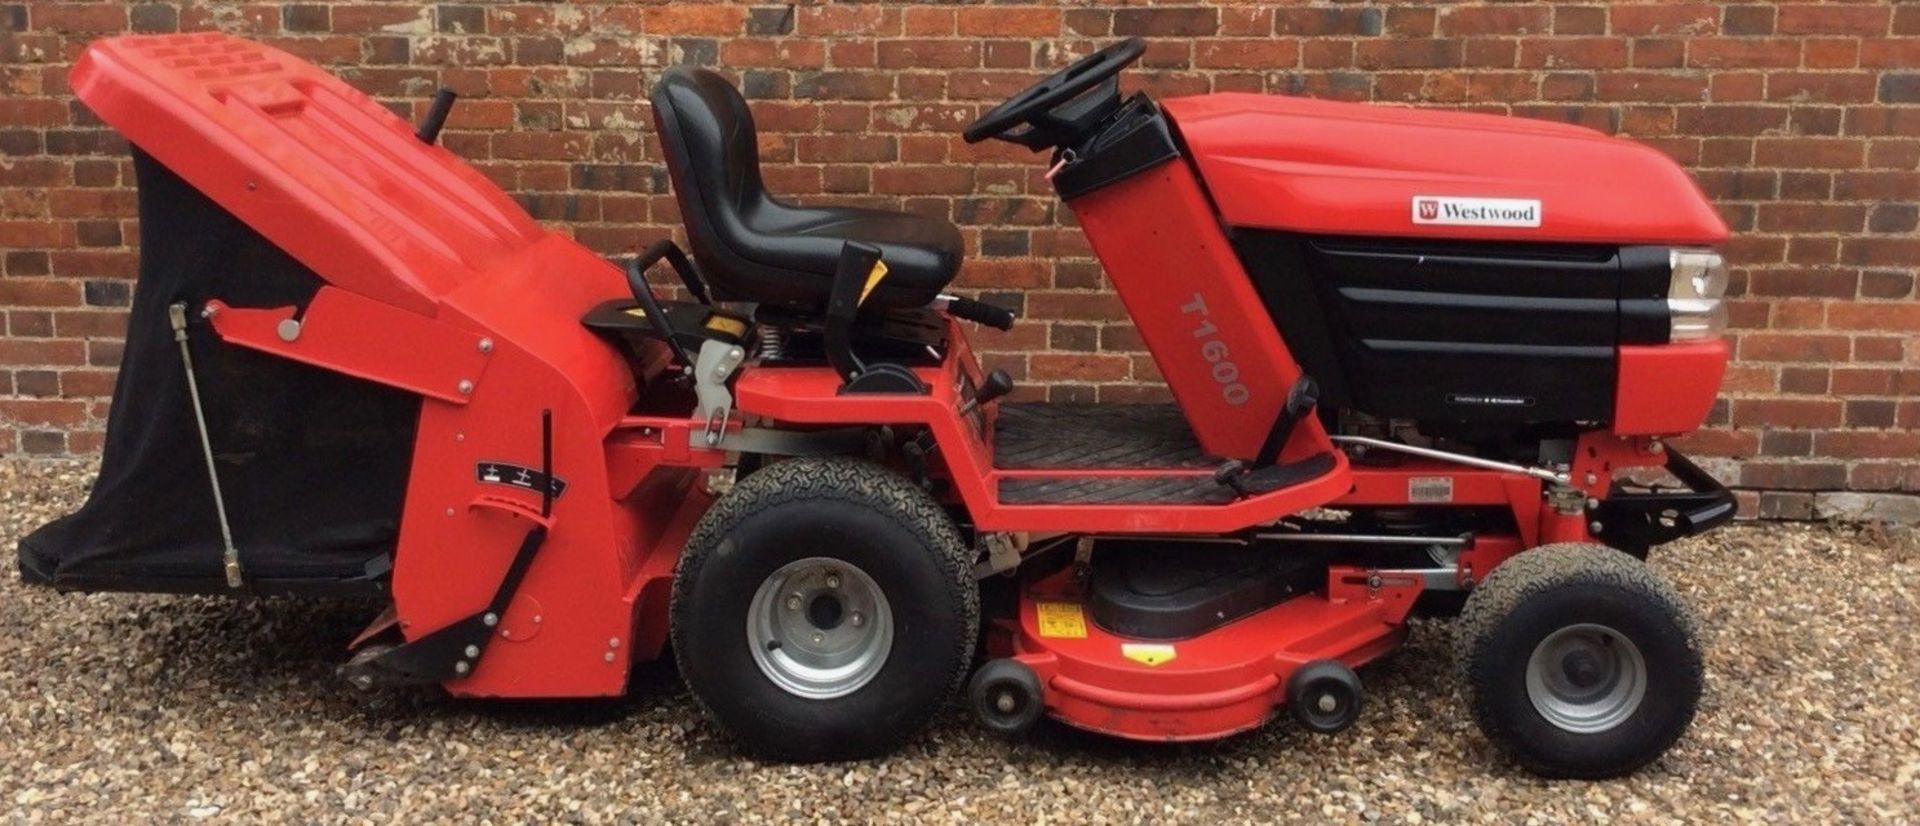 Westwood T1600H Ride On Mower 16 Hp Kawasaki Sit On Lawn Compact Tractor